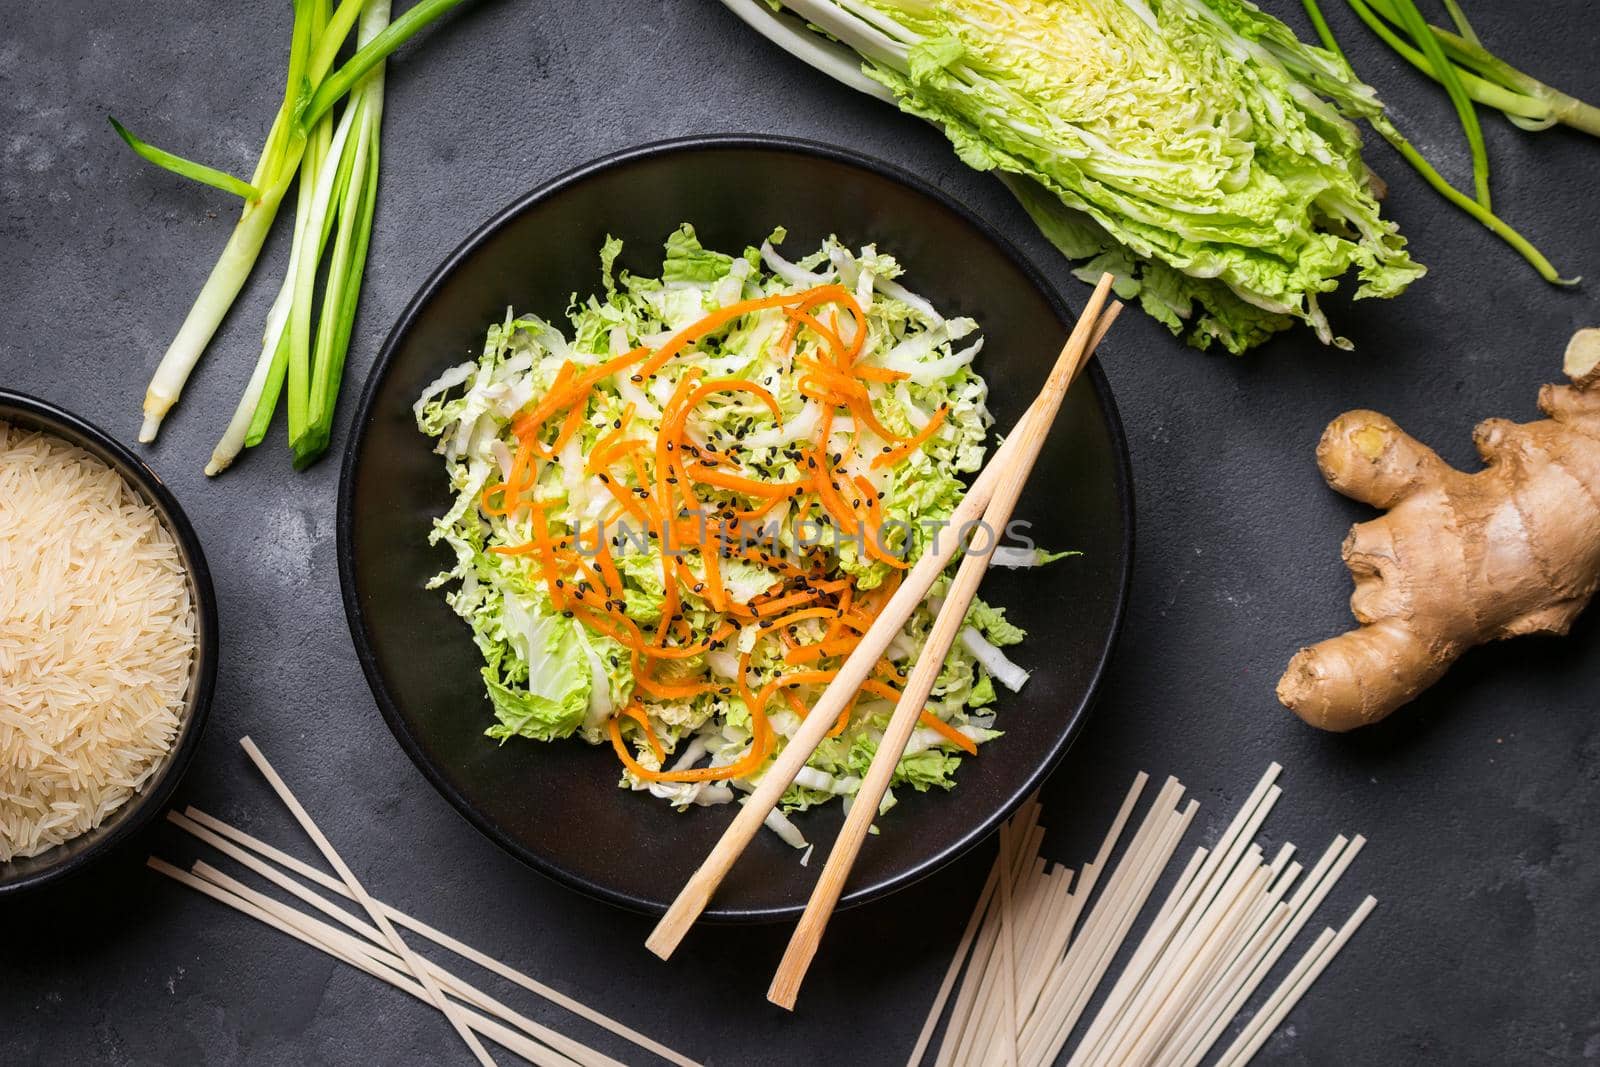 Asian or chinese salad with napa cabbage, carrot, black sesame seeds. Ingredients for making chinese dinner: wheat noodles, rice, napa cabbage, ginger, green onion. Asian cooking ingredients. Top view